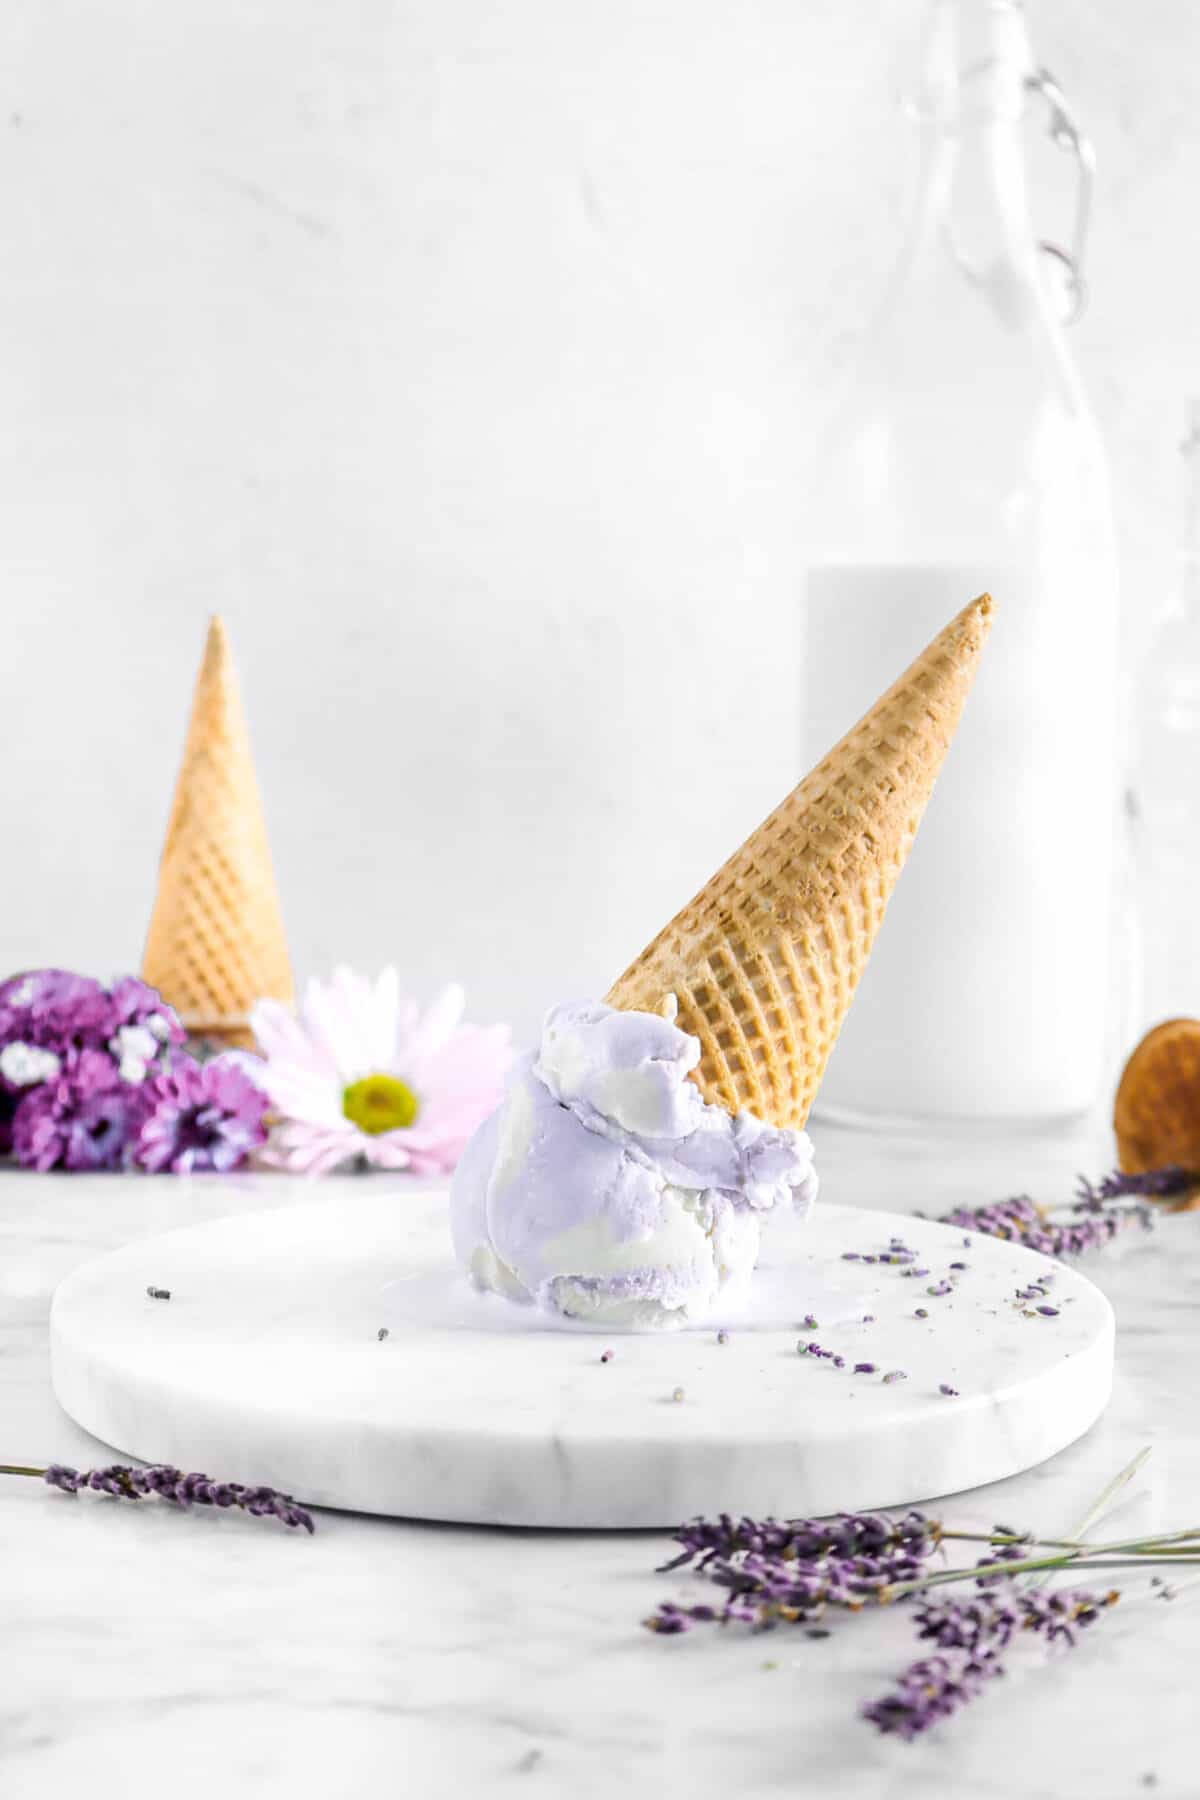 ice cream upside down on marble plate with flowers and glass of milk